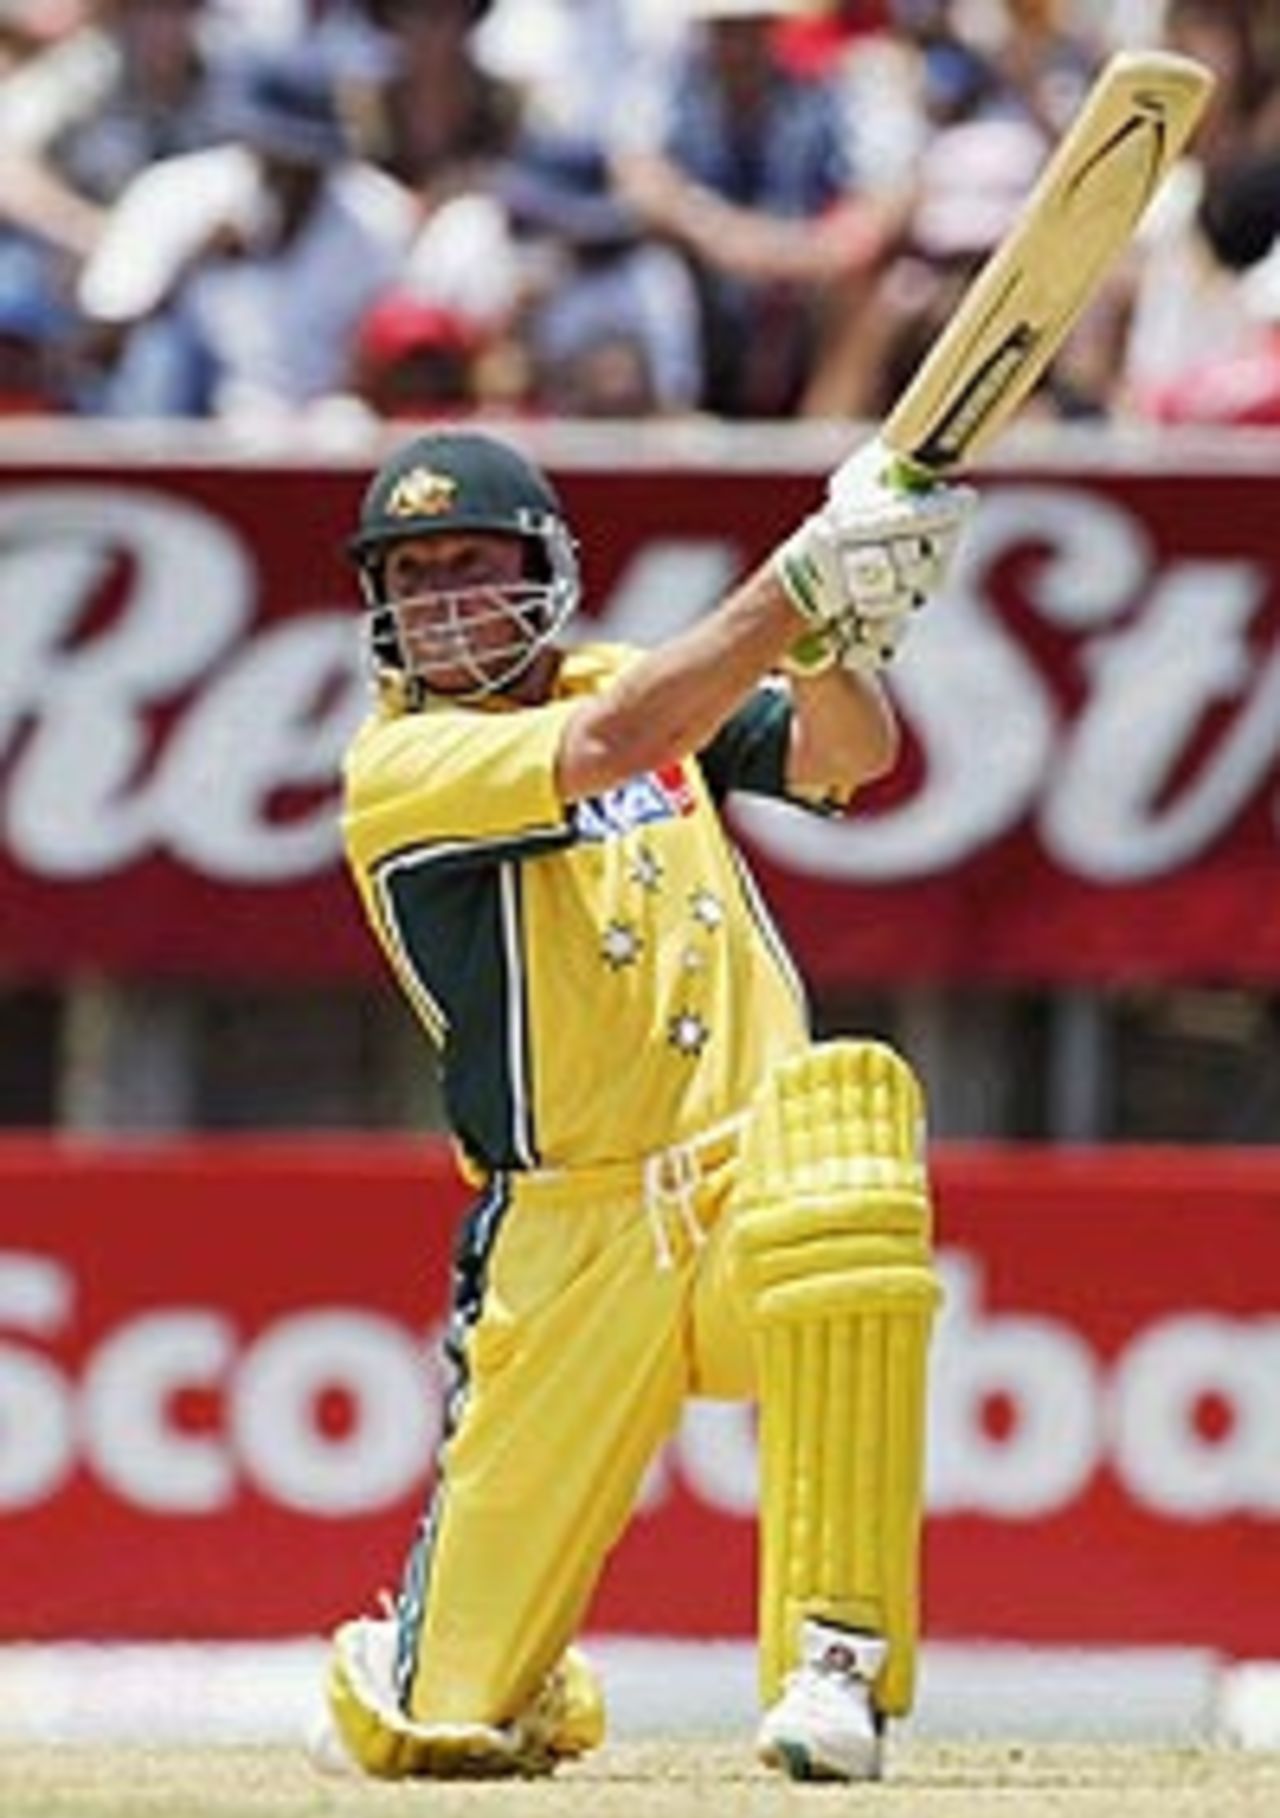 Ian Harvey drives on the up during his vital innings of 48 not out from 30 balls